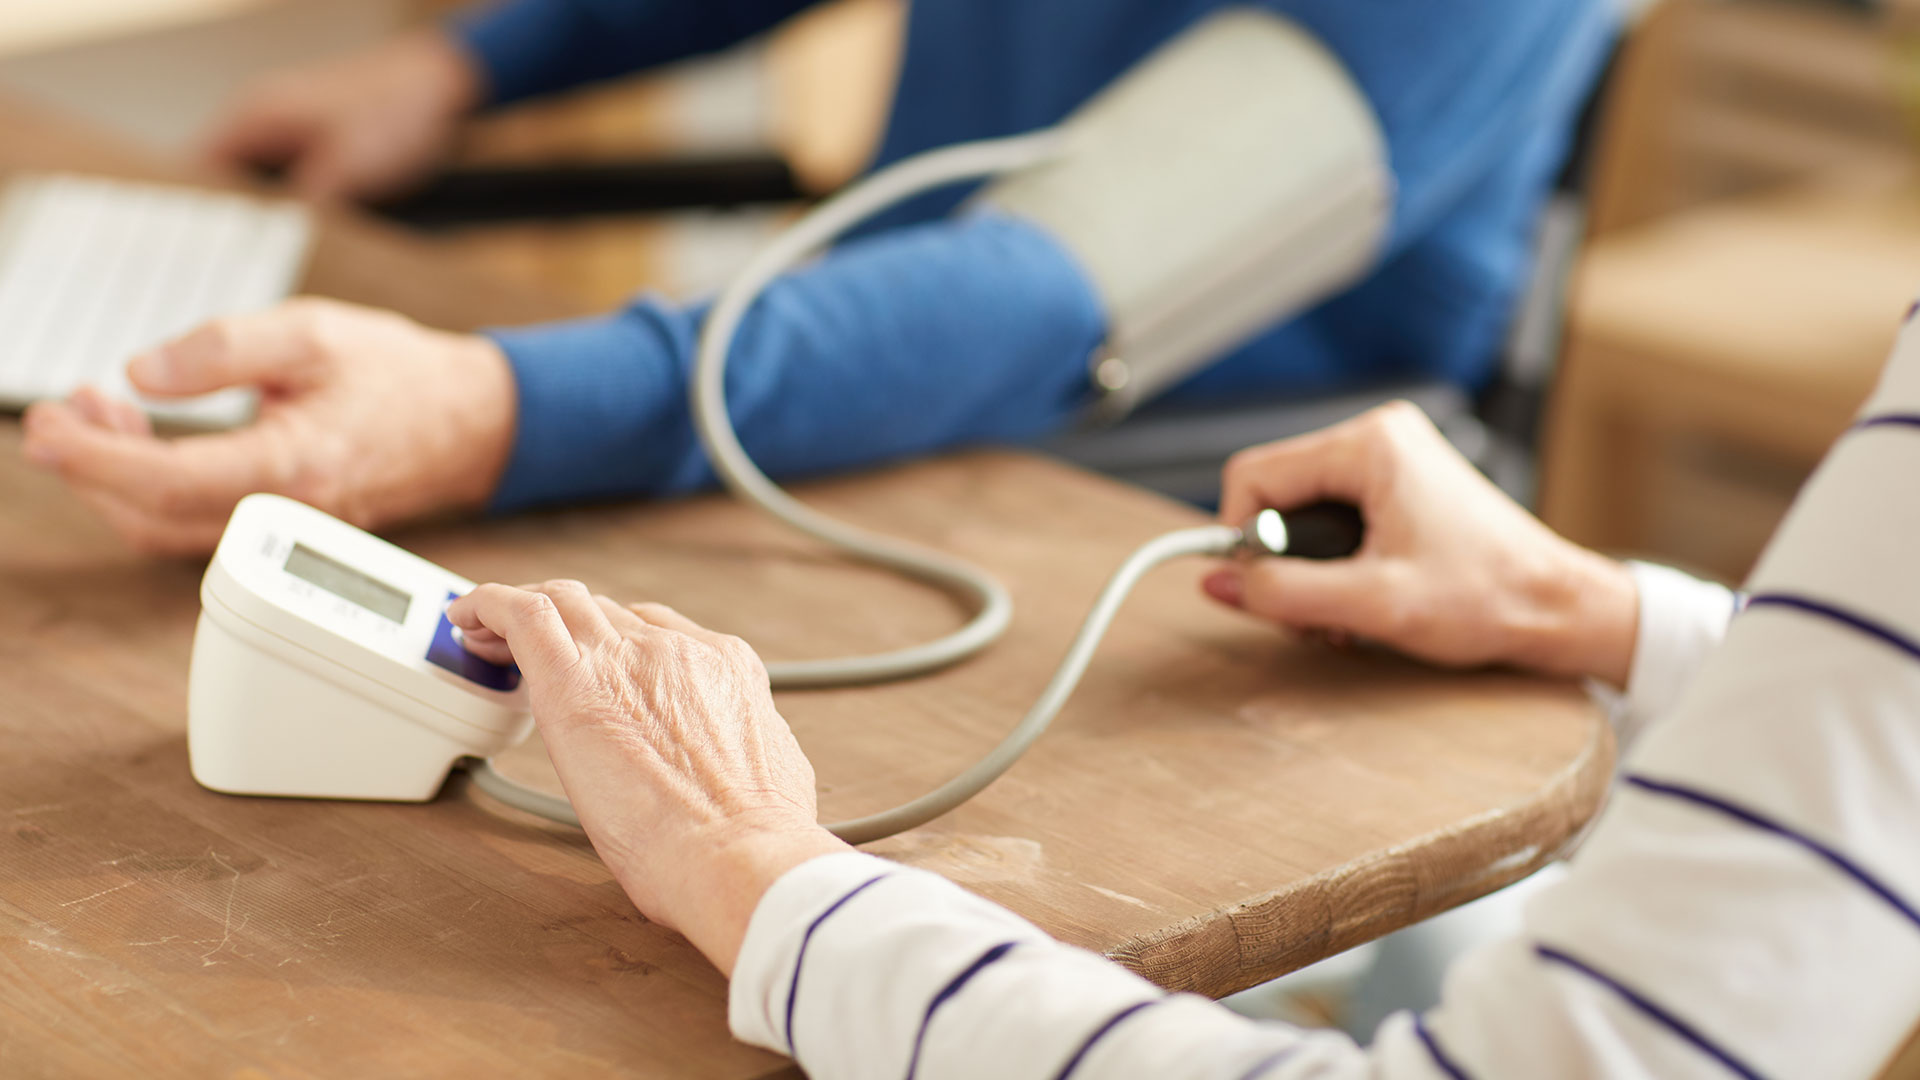 monitoring blood pressure at home